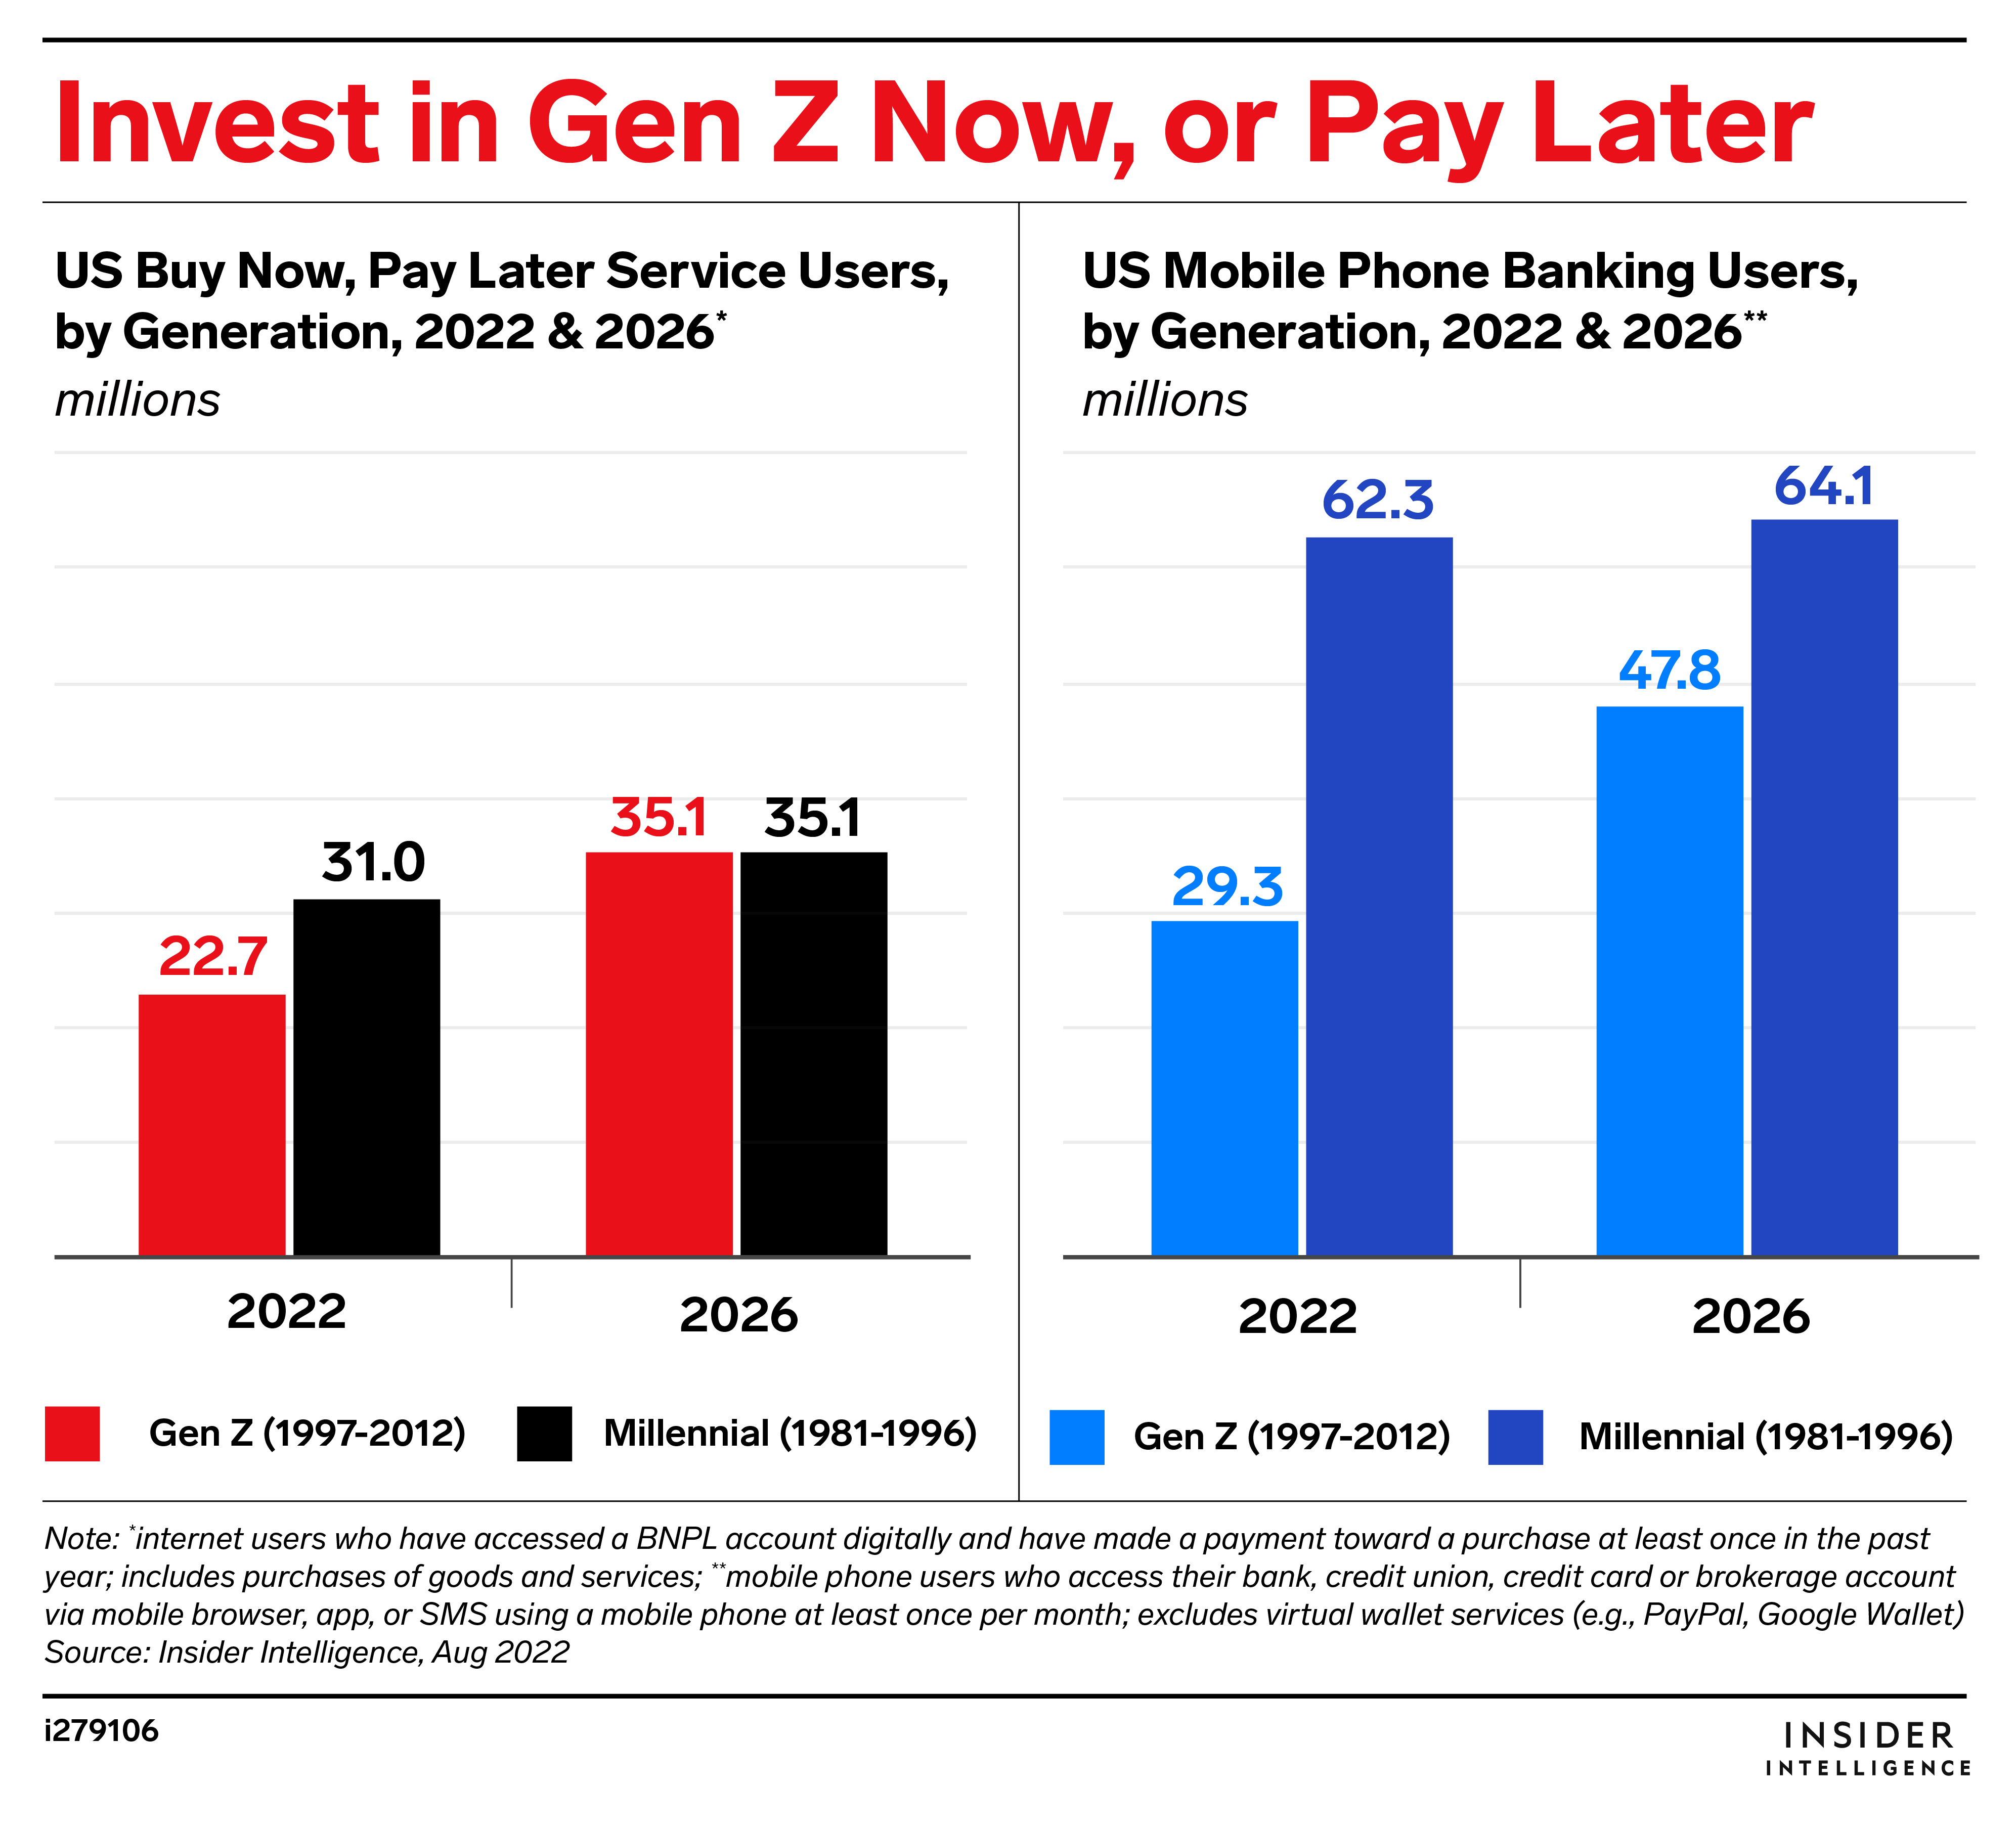 Invest in Gen Z Now, or Pay Later, 2022 & 2026 (millions)